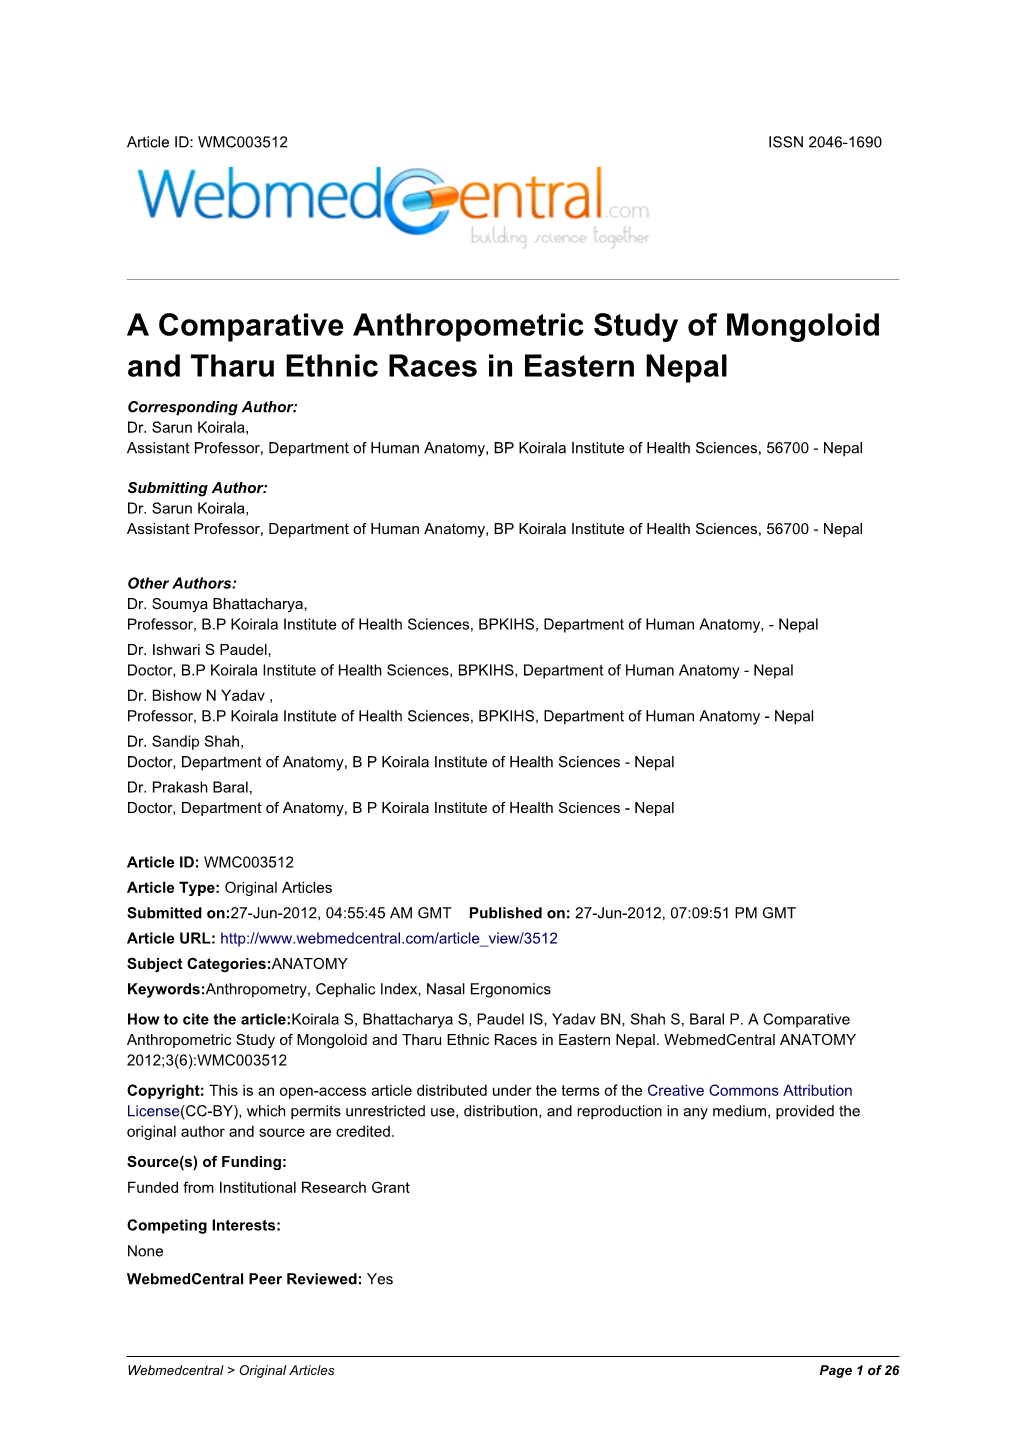 A Comparative Anthropometric Study of Mongoloid and Tharu Ethnic Races in Eastern Nepal